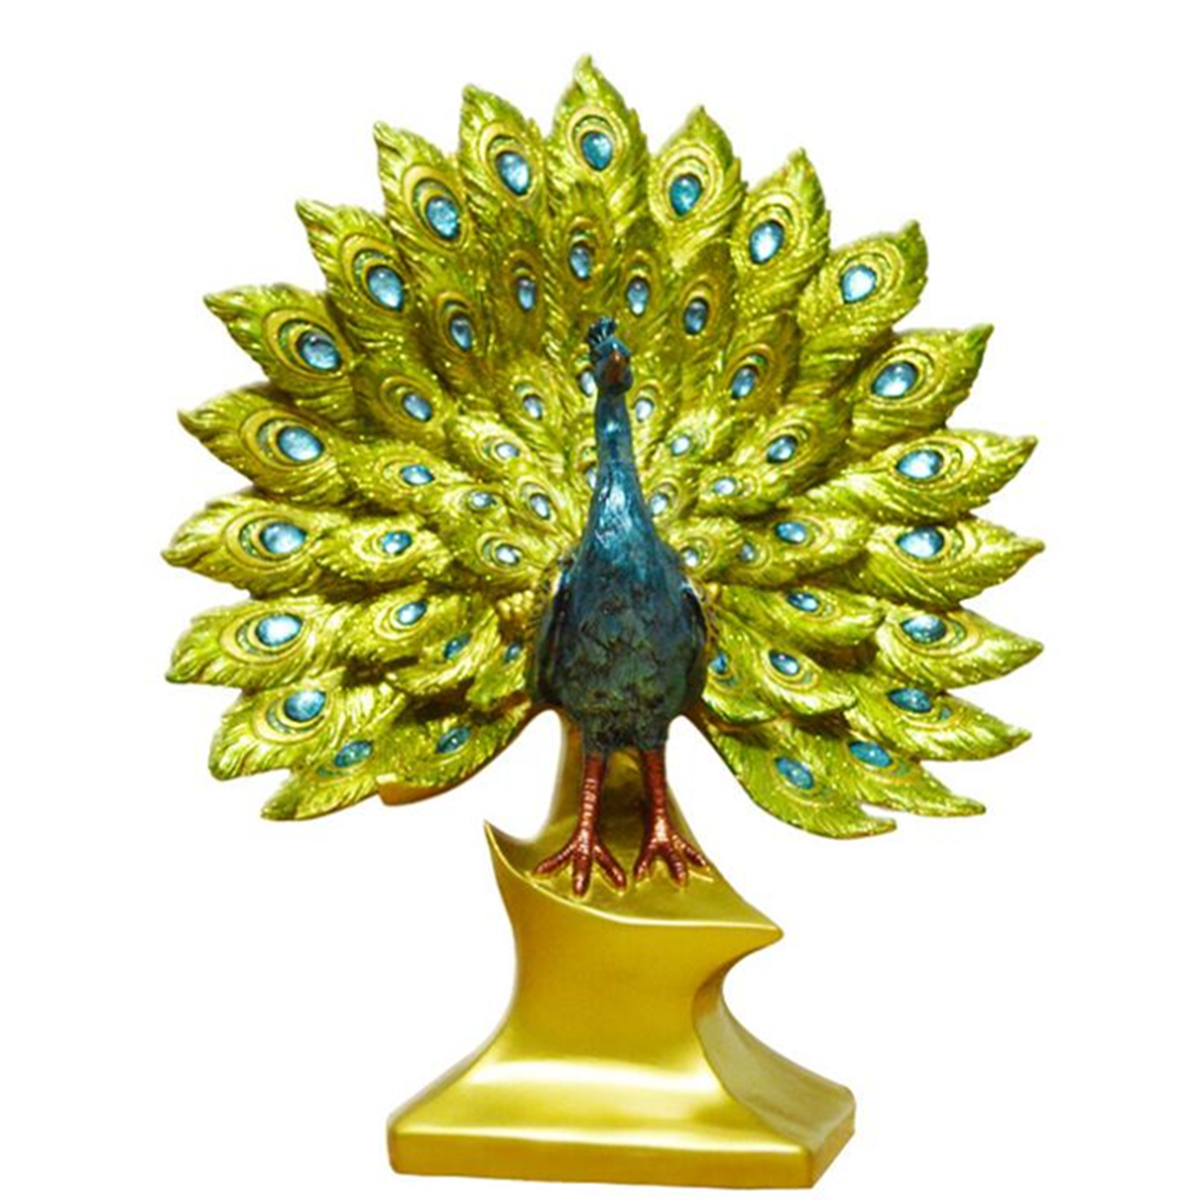 

Creative Peacock Ornament Resin Figurine Statue Craft Home Decorations Wedding Gift